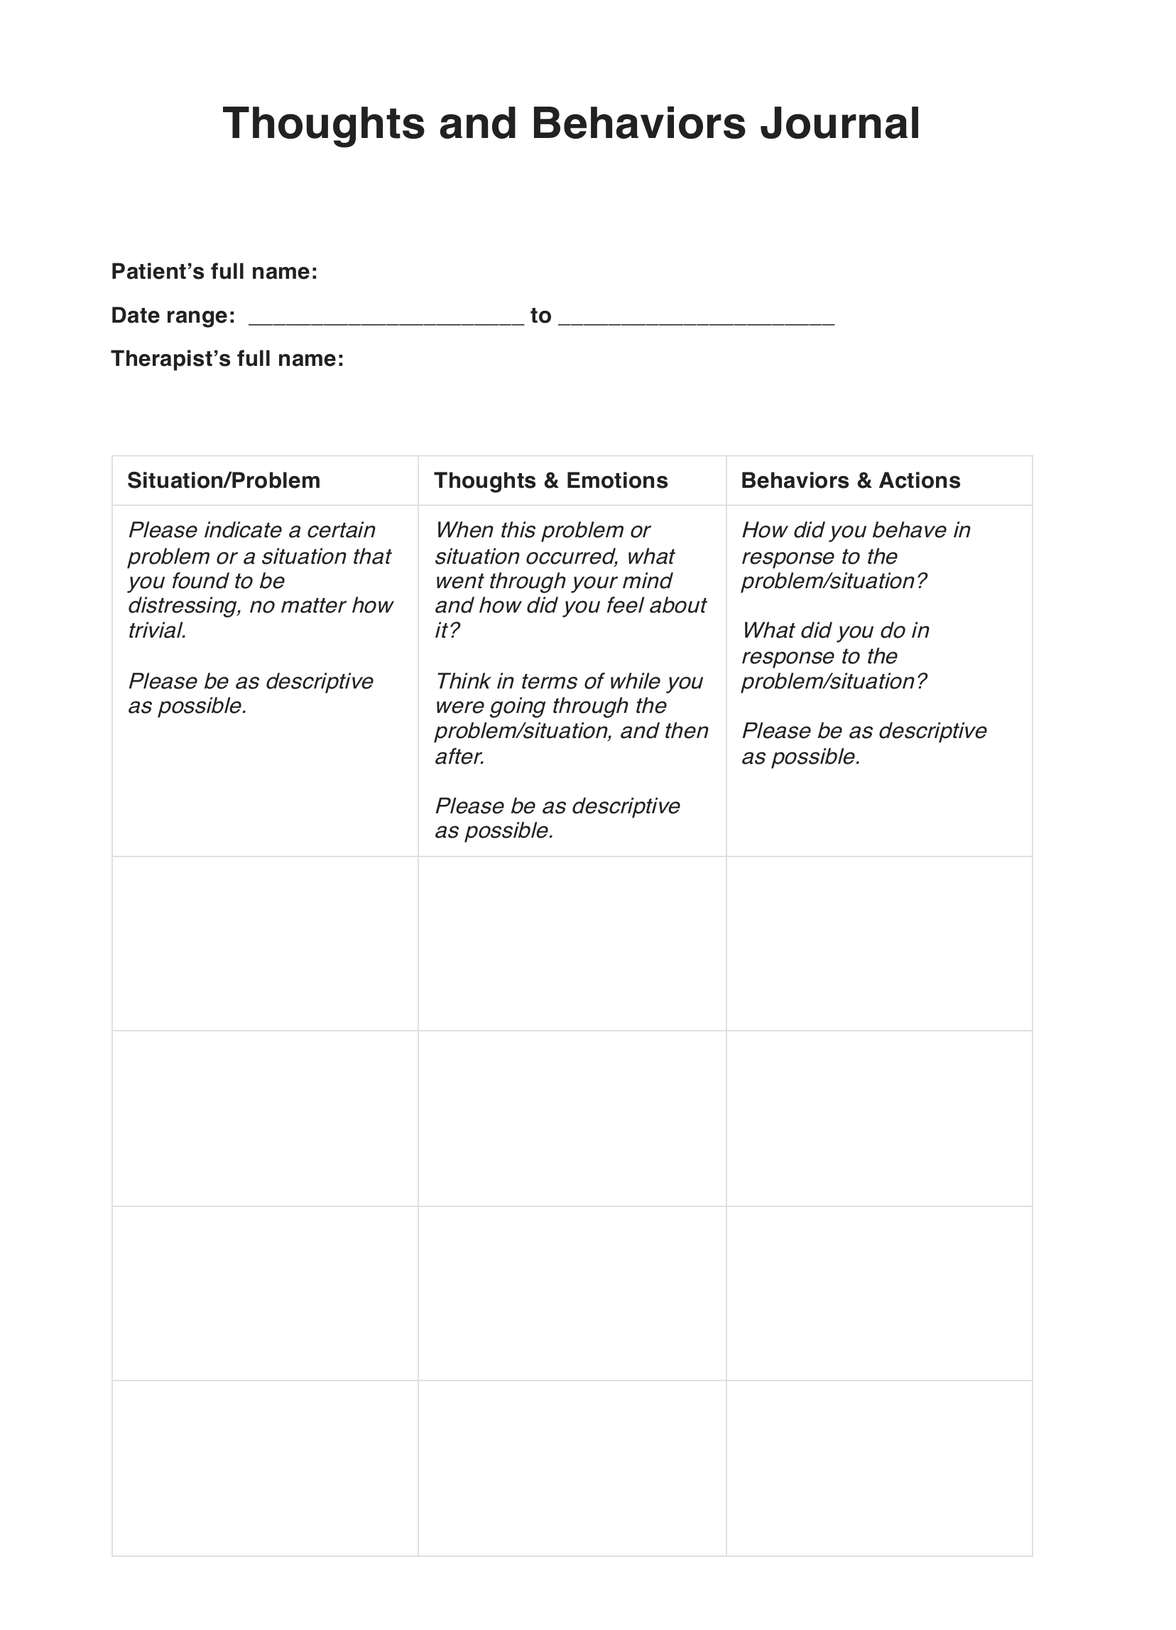 Thoughts and Behaviors Journal CBT Worksheet PDF Example